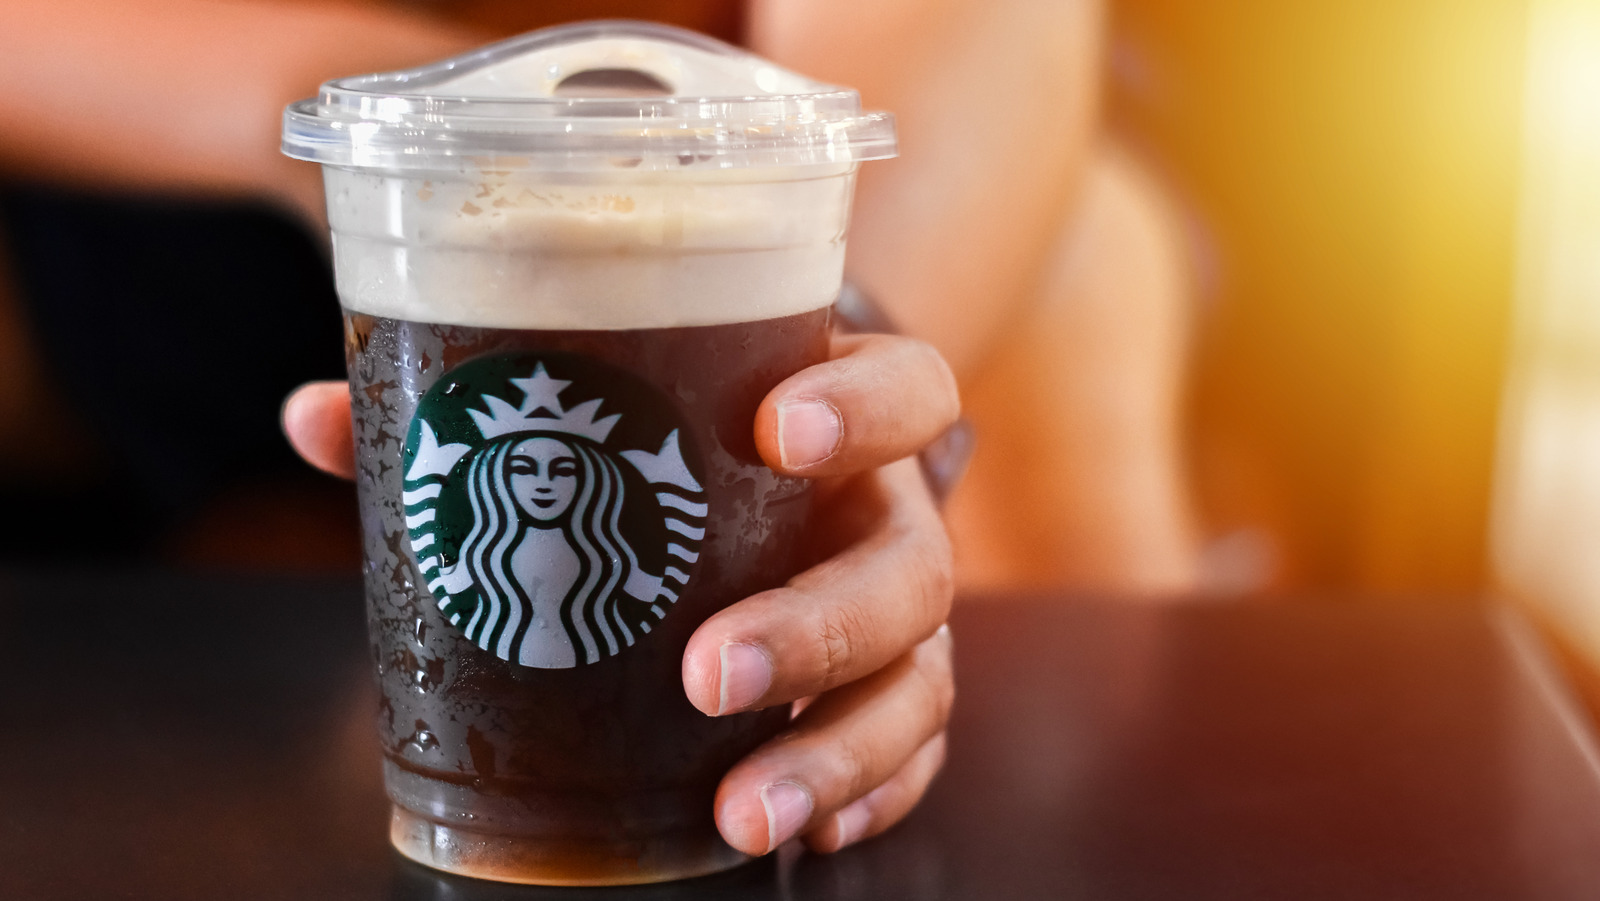 How to Make Cold Foam for Coffee from Starbucks at Home